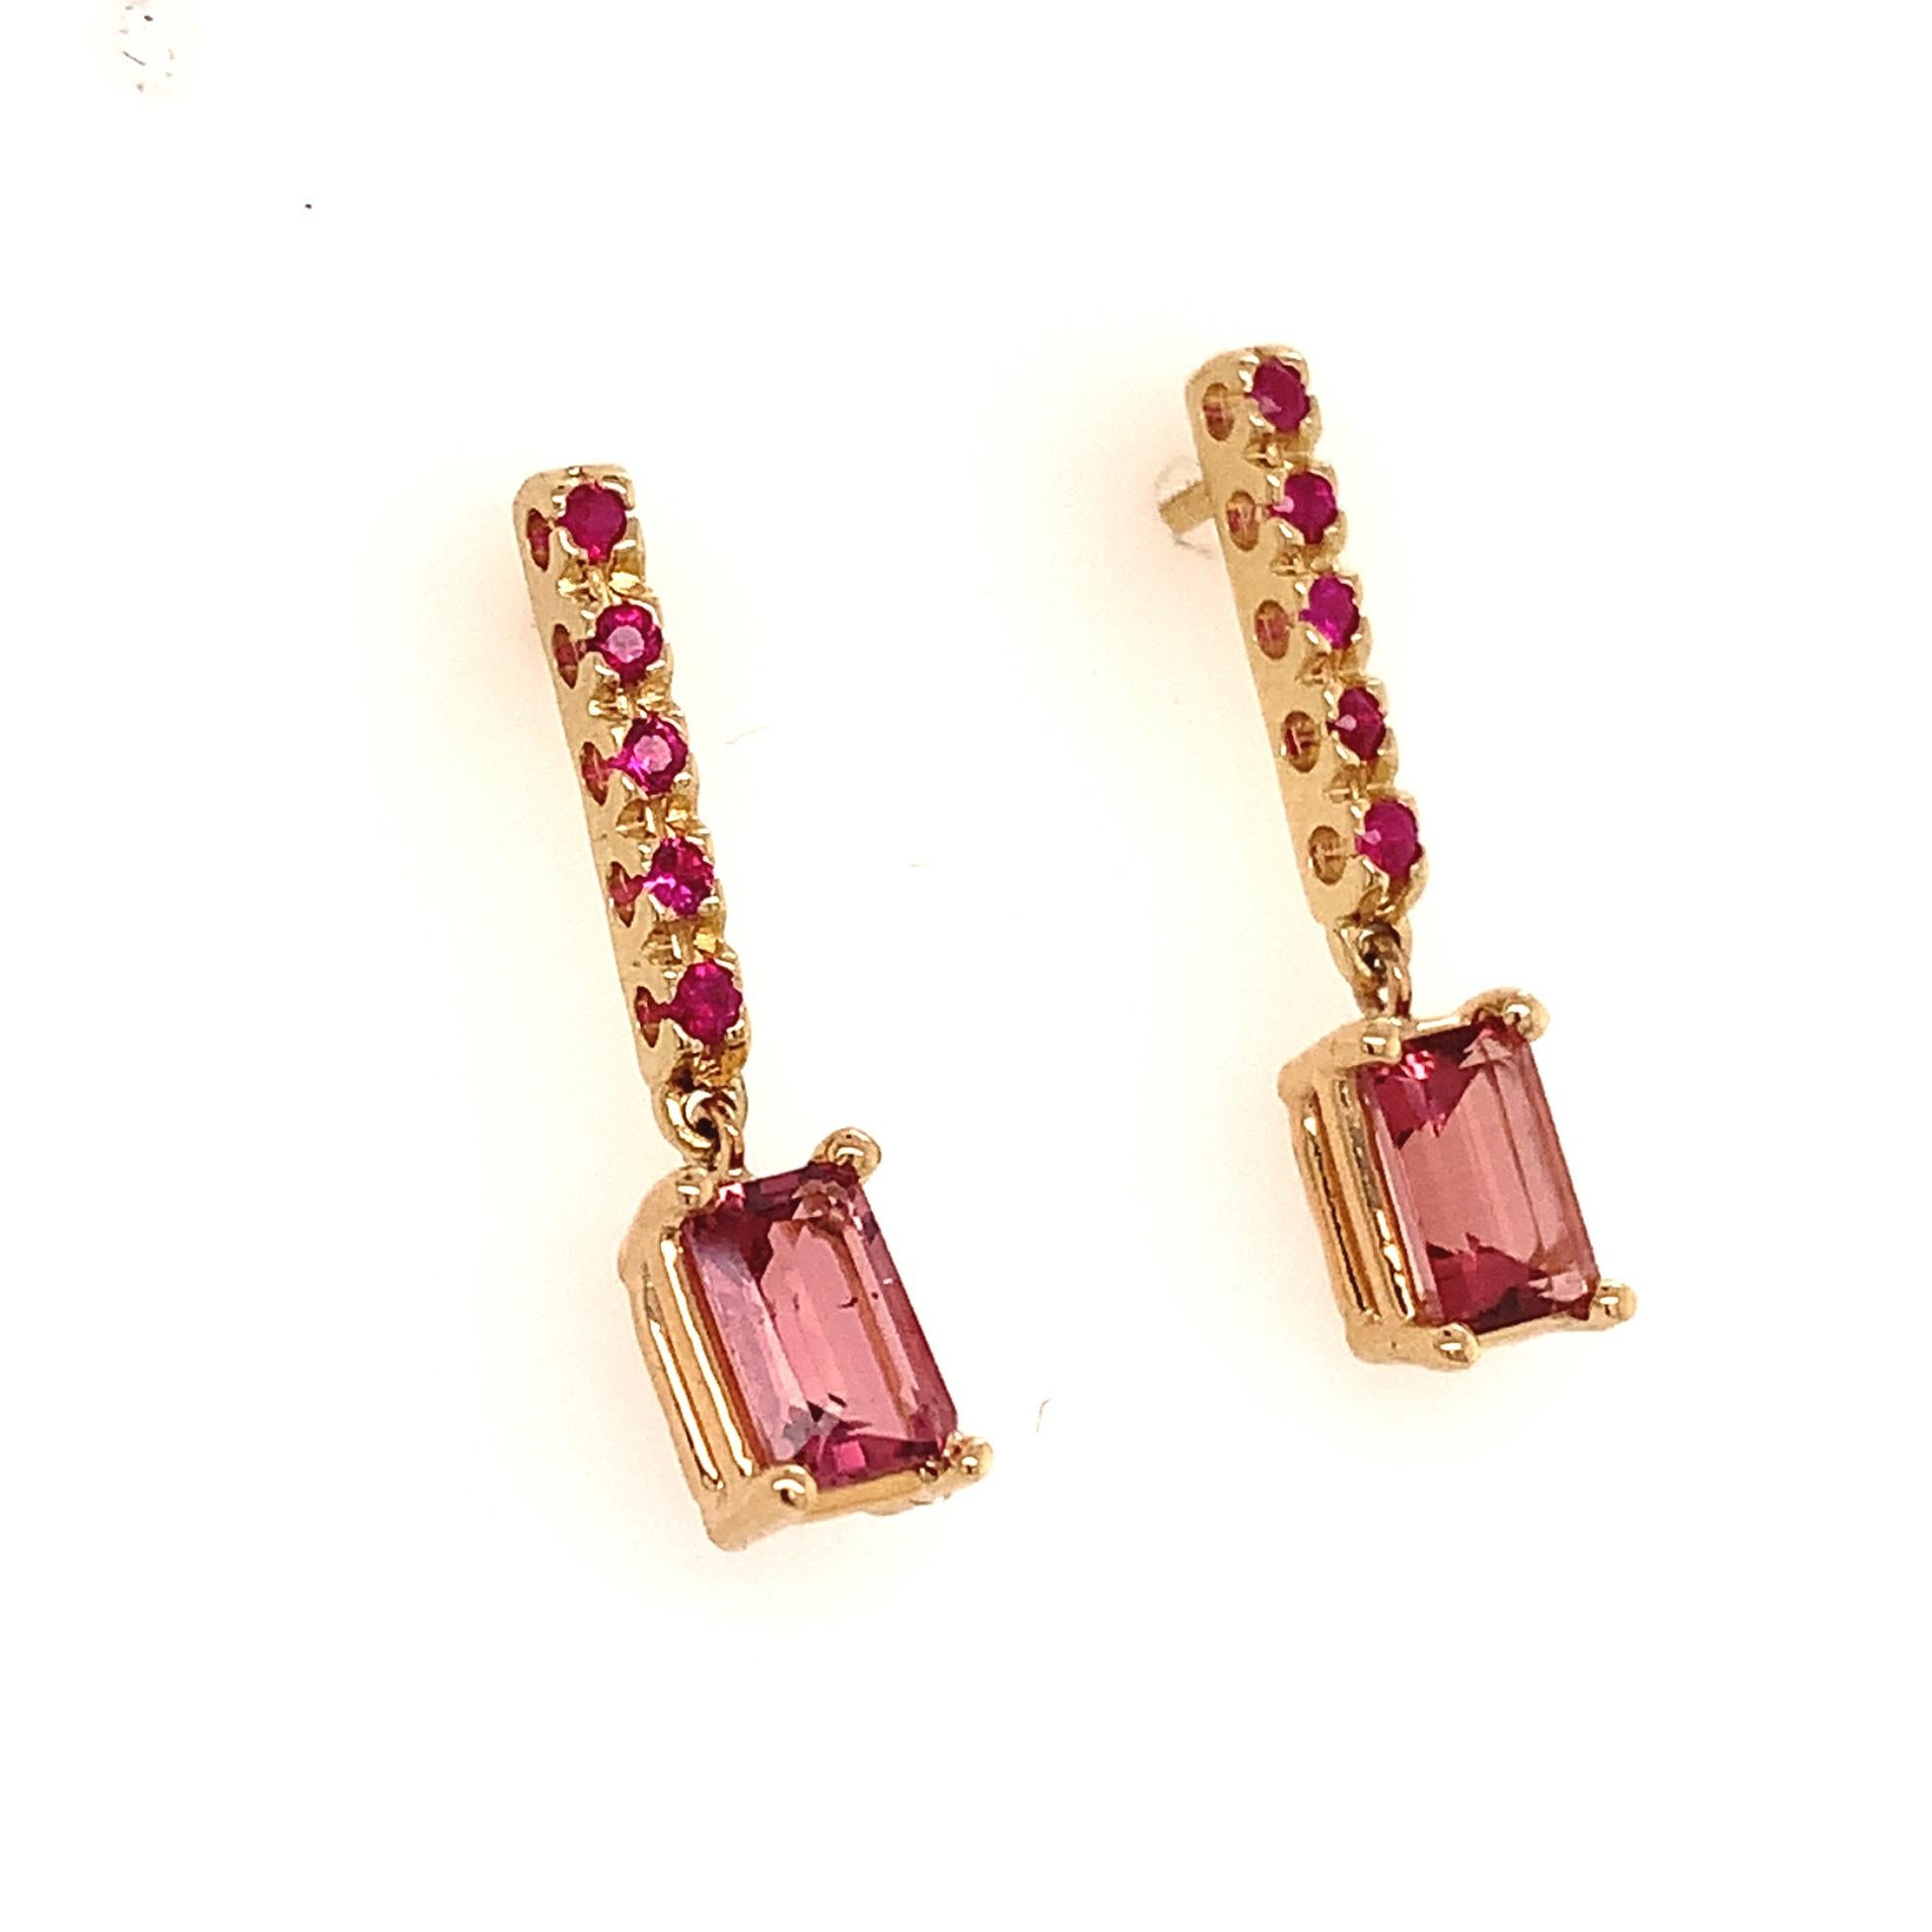 Square Cut Rubellite Tourmaline Ruby Earrings 14k Gold 1.25 TCW Certified For Sale